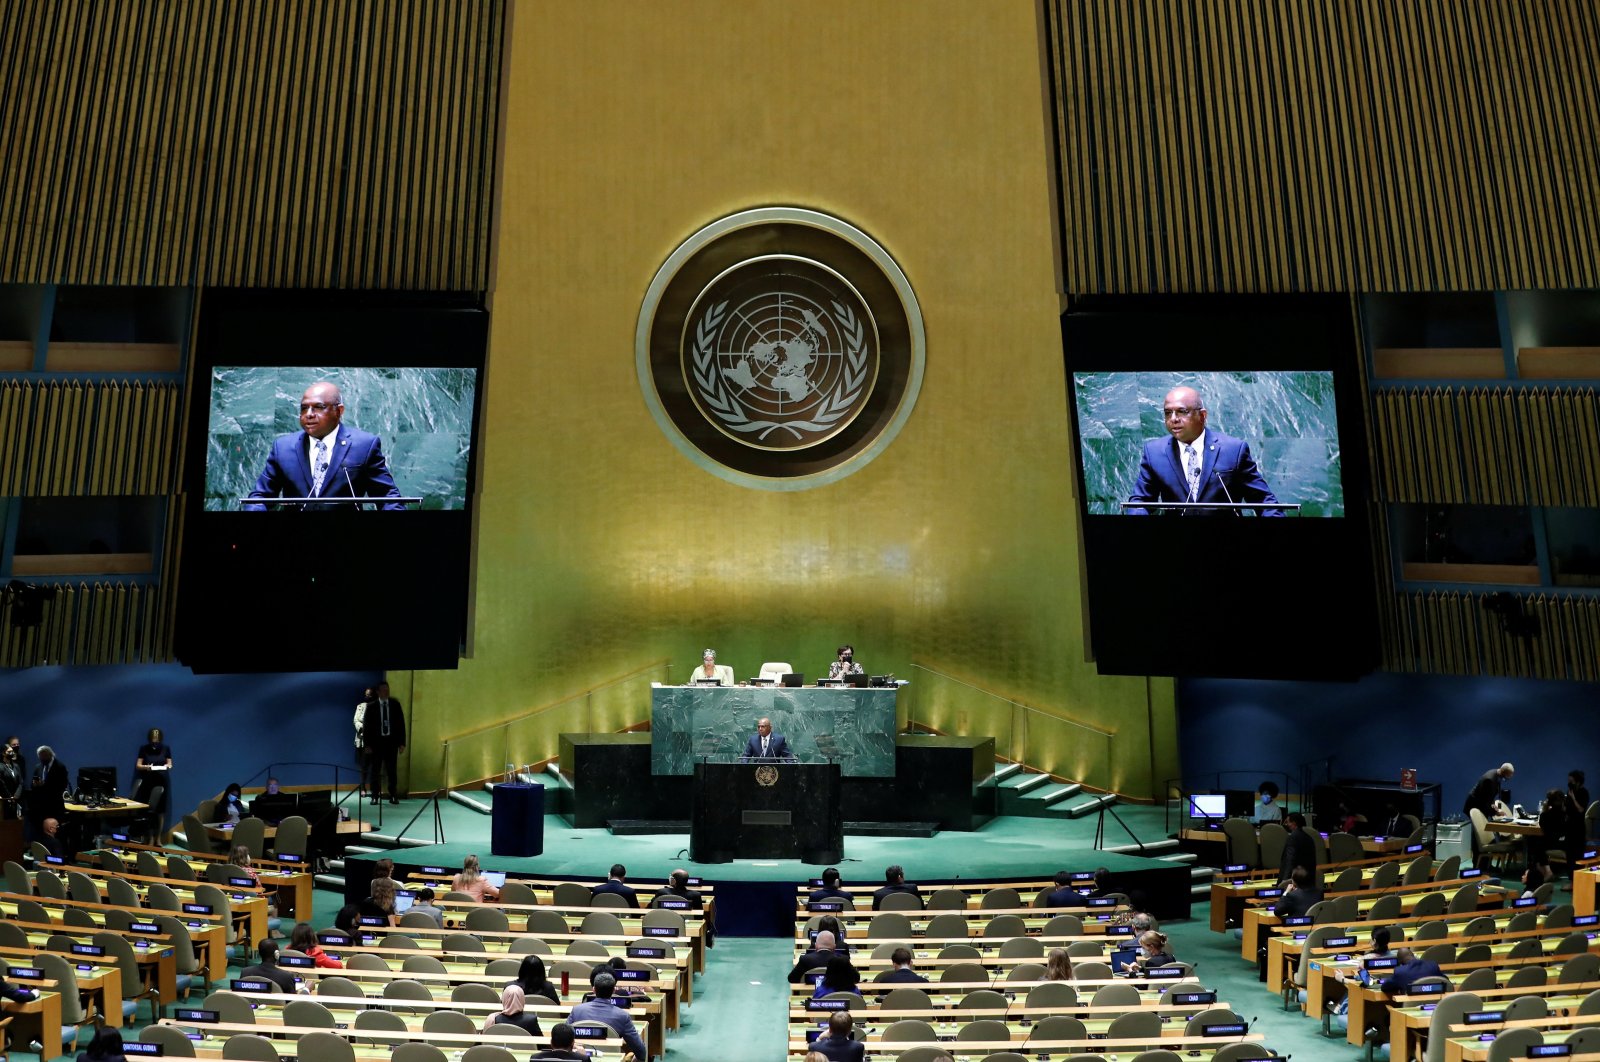 President of the United Nations General Assembly Abdulla Shahid speaks at the U.N. headquarters in New York, U.S., July 18, 2022. (REUTERS Photo)